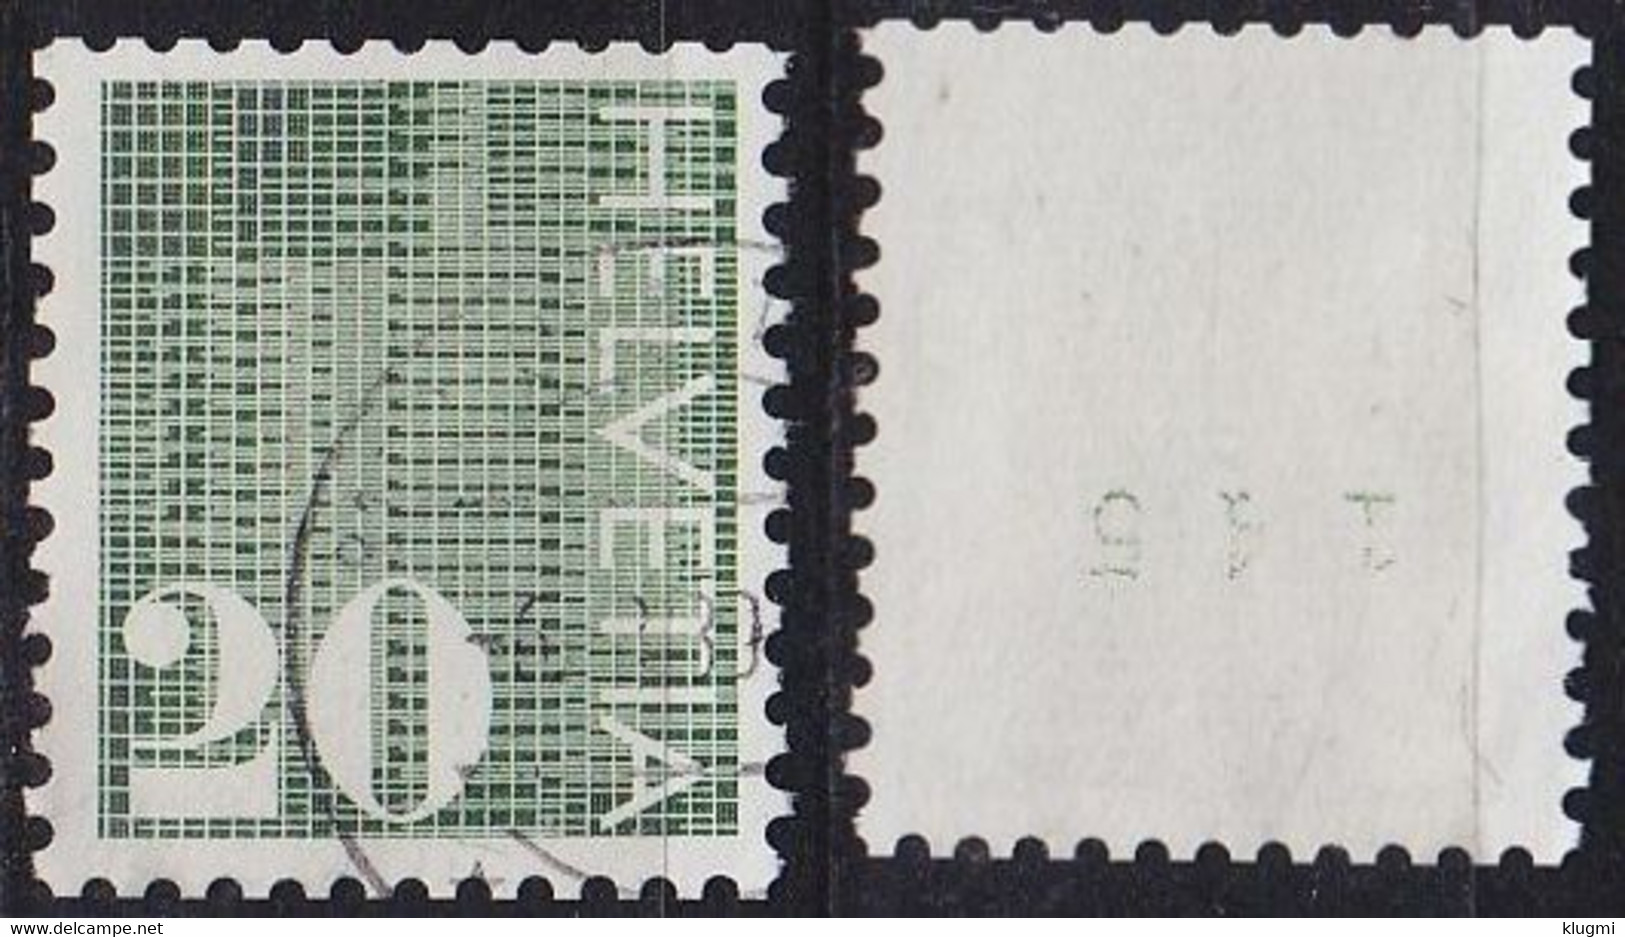 SCHWEIZ SWITZERLAND [Rolle] MiNr 0934 II ( O/used ) [01] - Coil Stamps